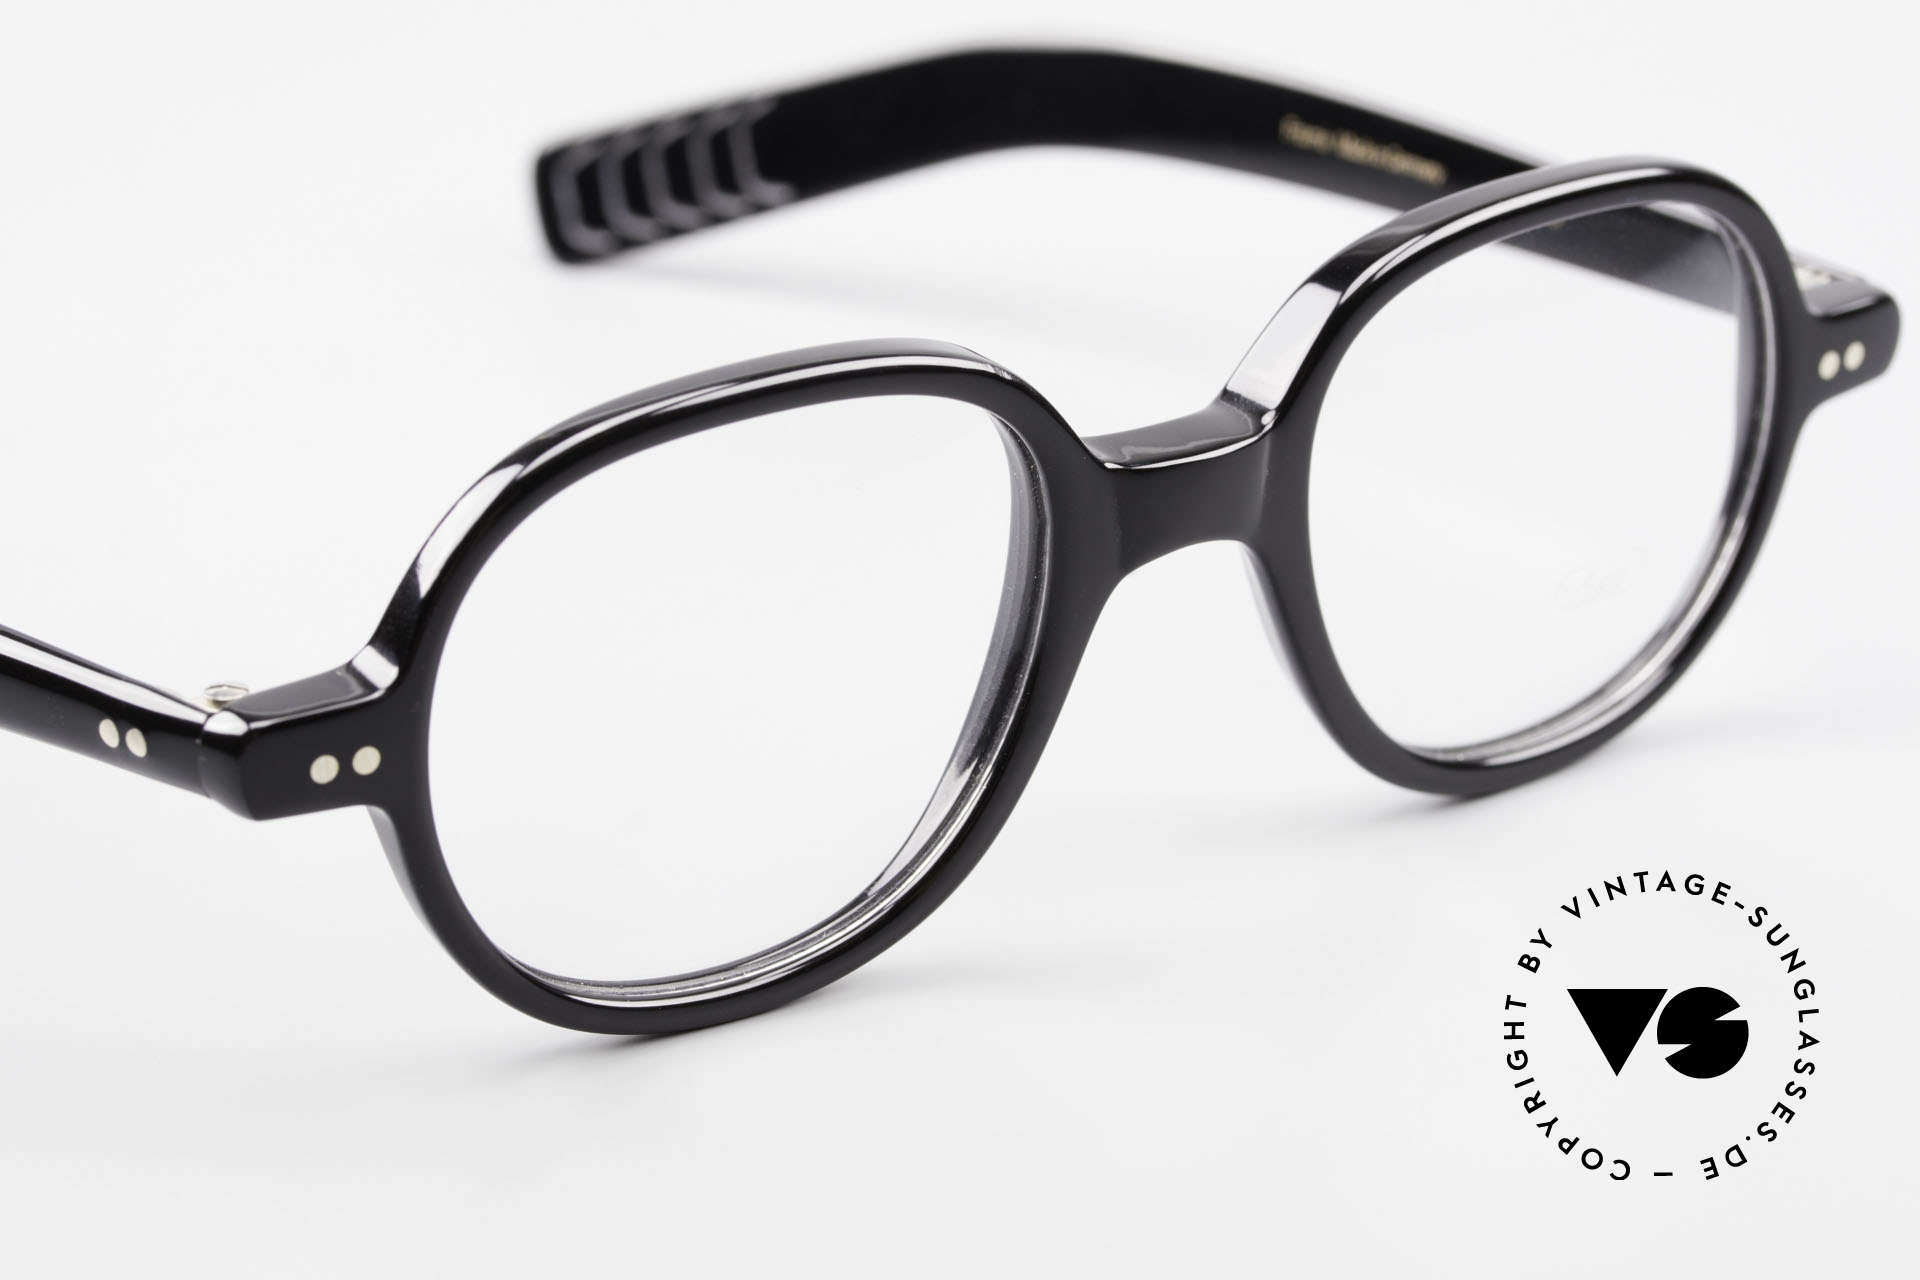 Lunor A50 Round Lunor Acetate Glasses, unworn (like all our beautiful Lunor frames & sunglasses), Made for Men and Women